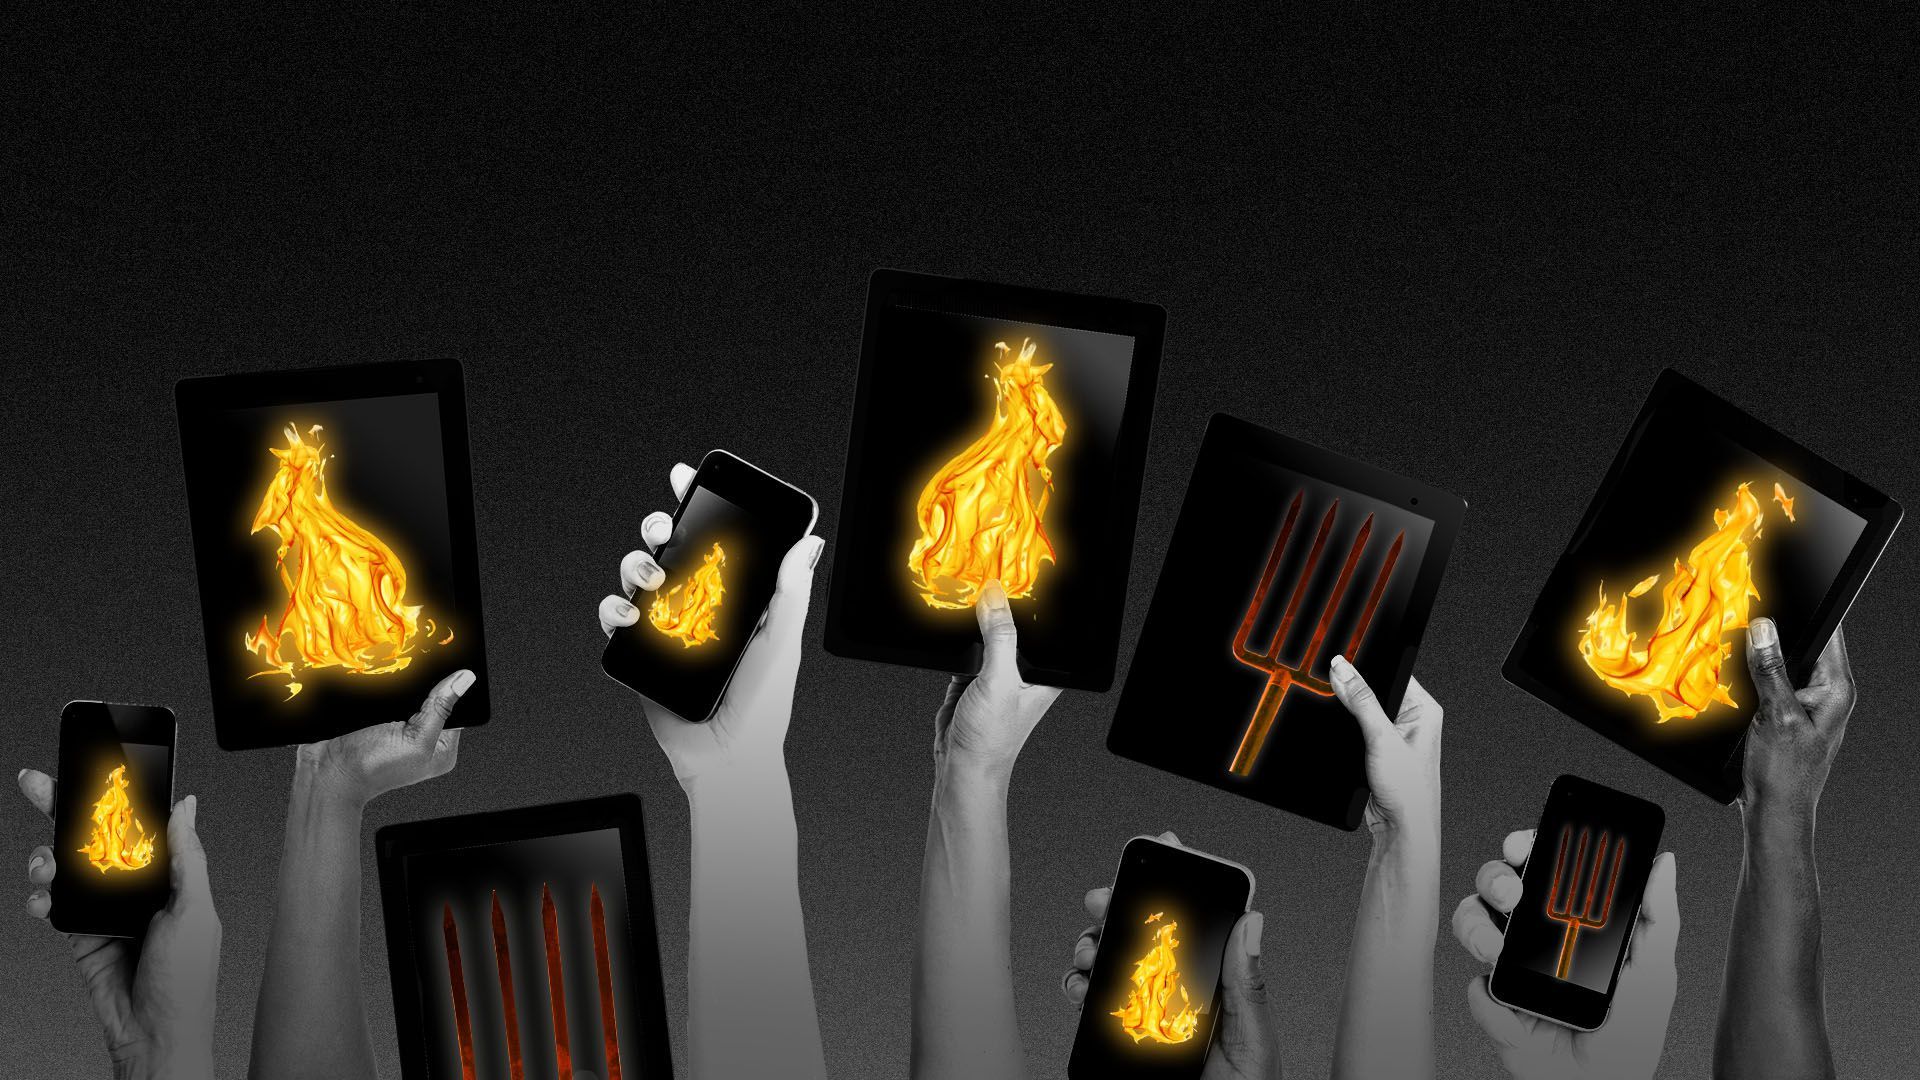 An illustration of a mob with smartphones instead of pitchforks